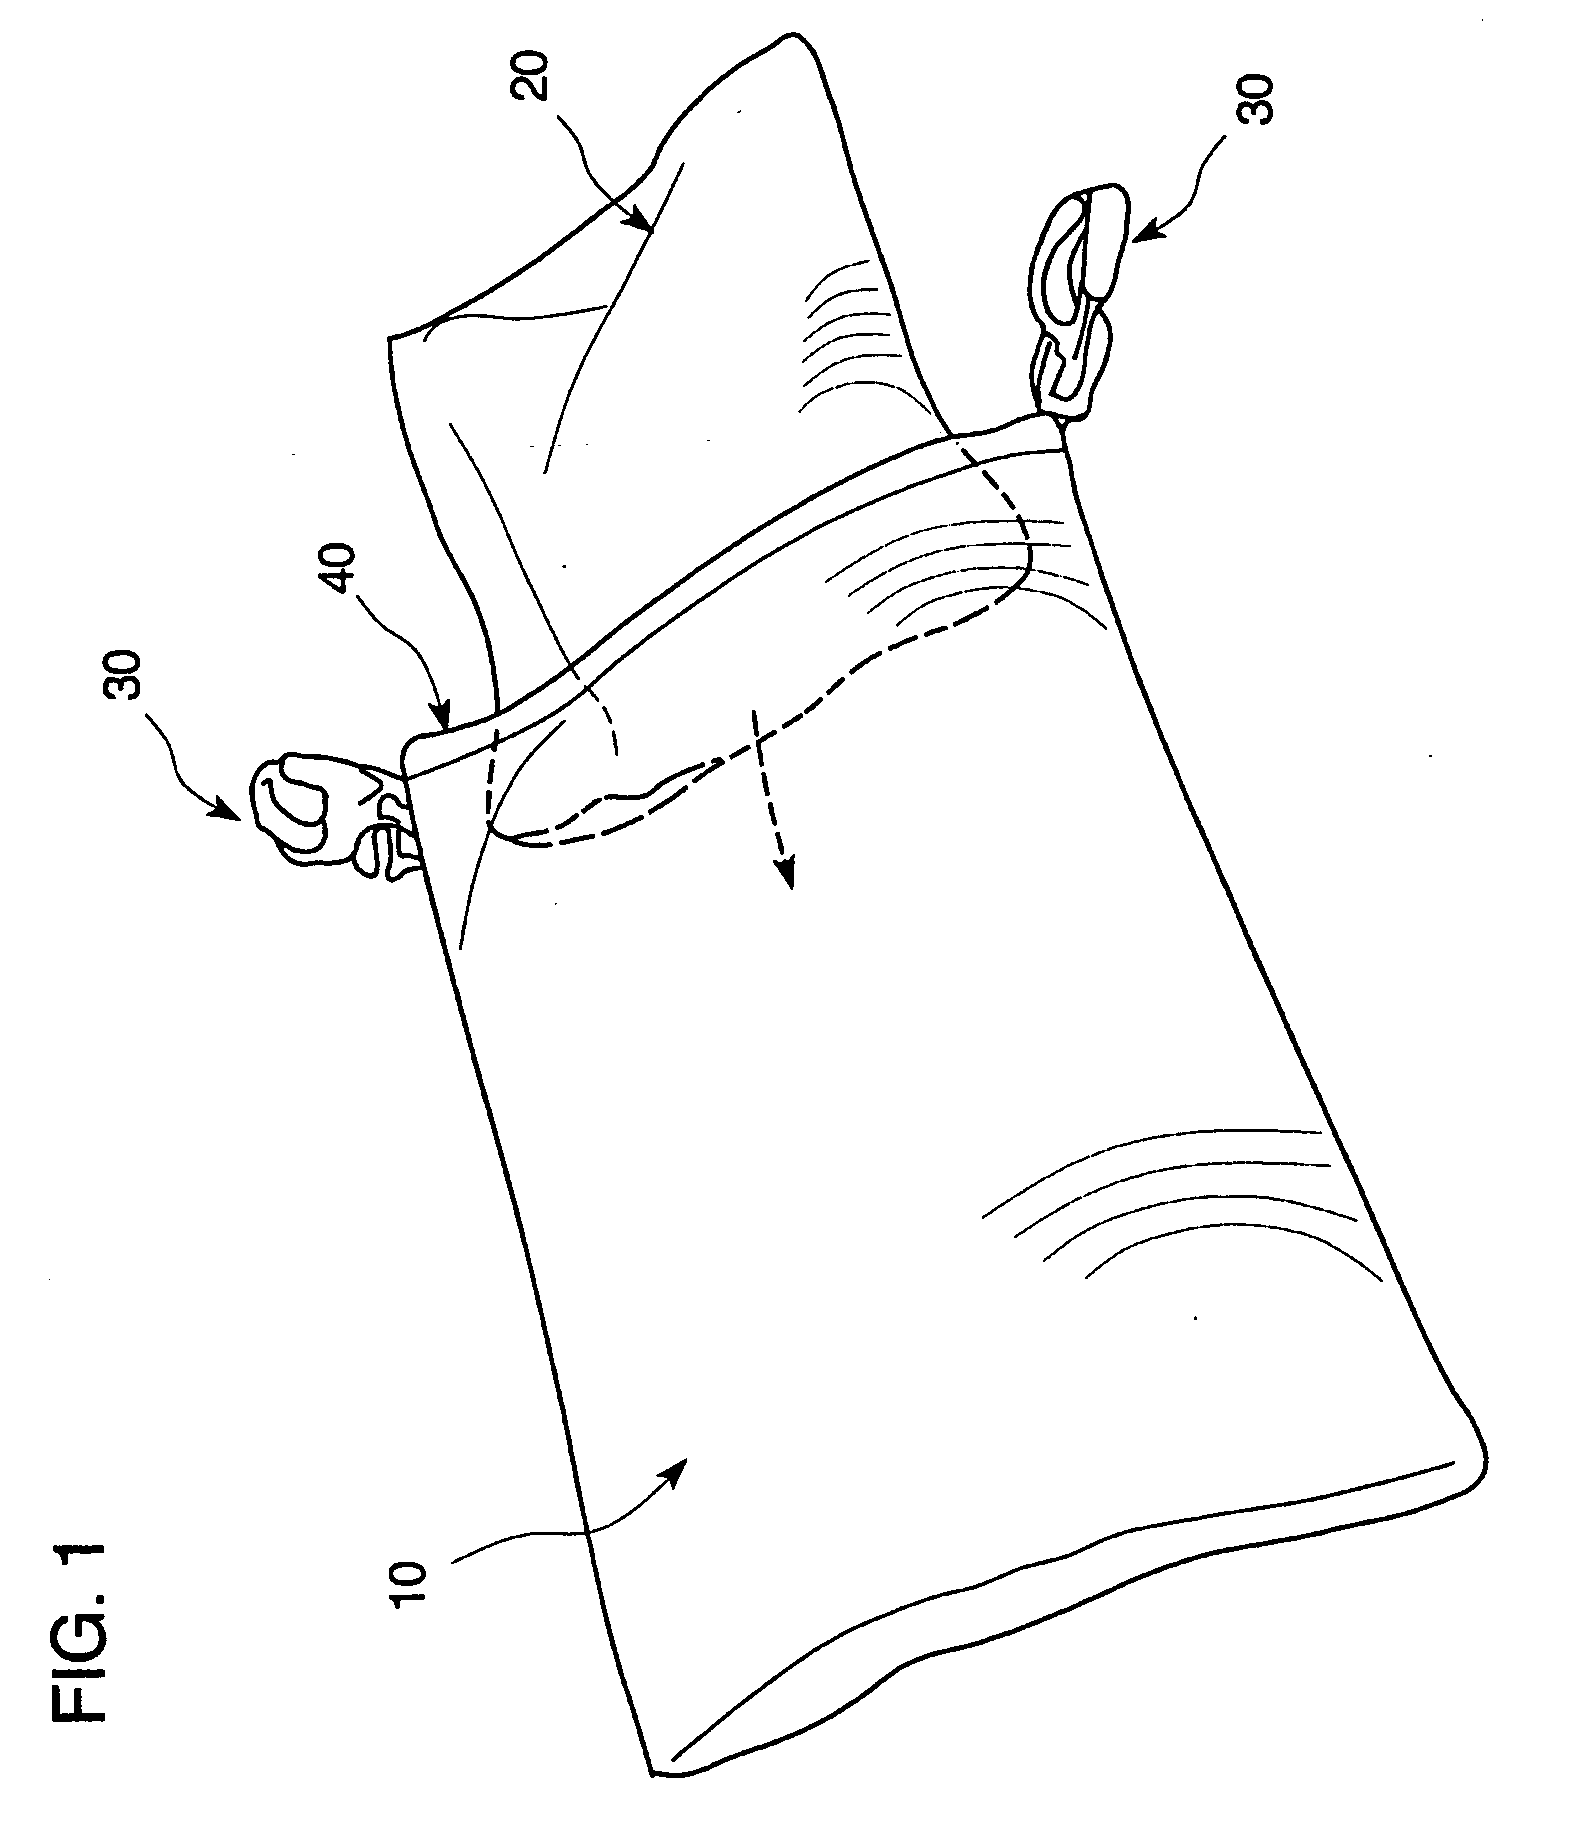 Apparatus and method for applying cooling substances to pressure points in the human body